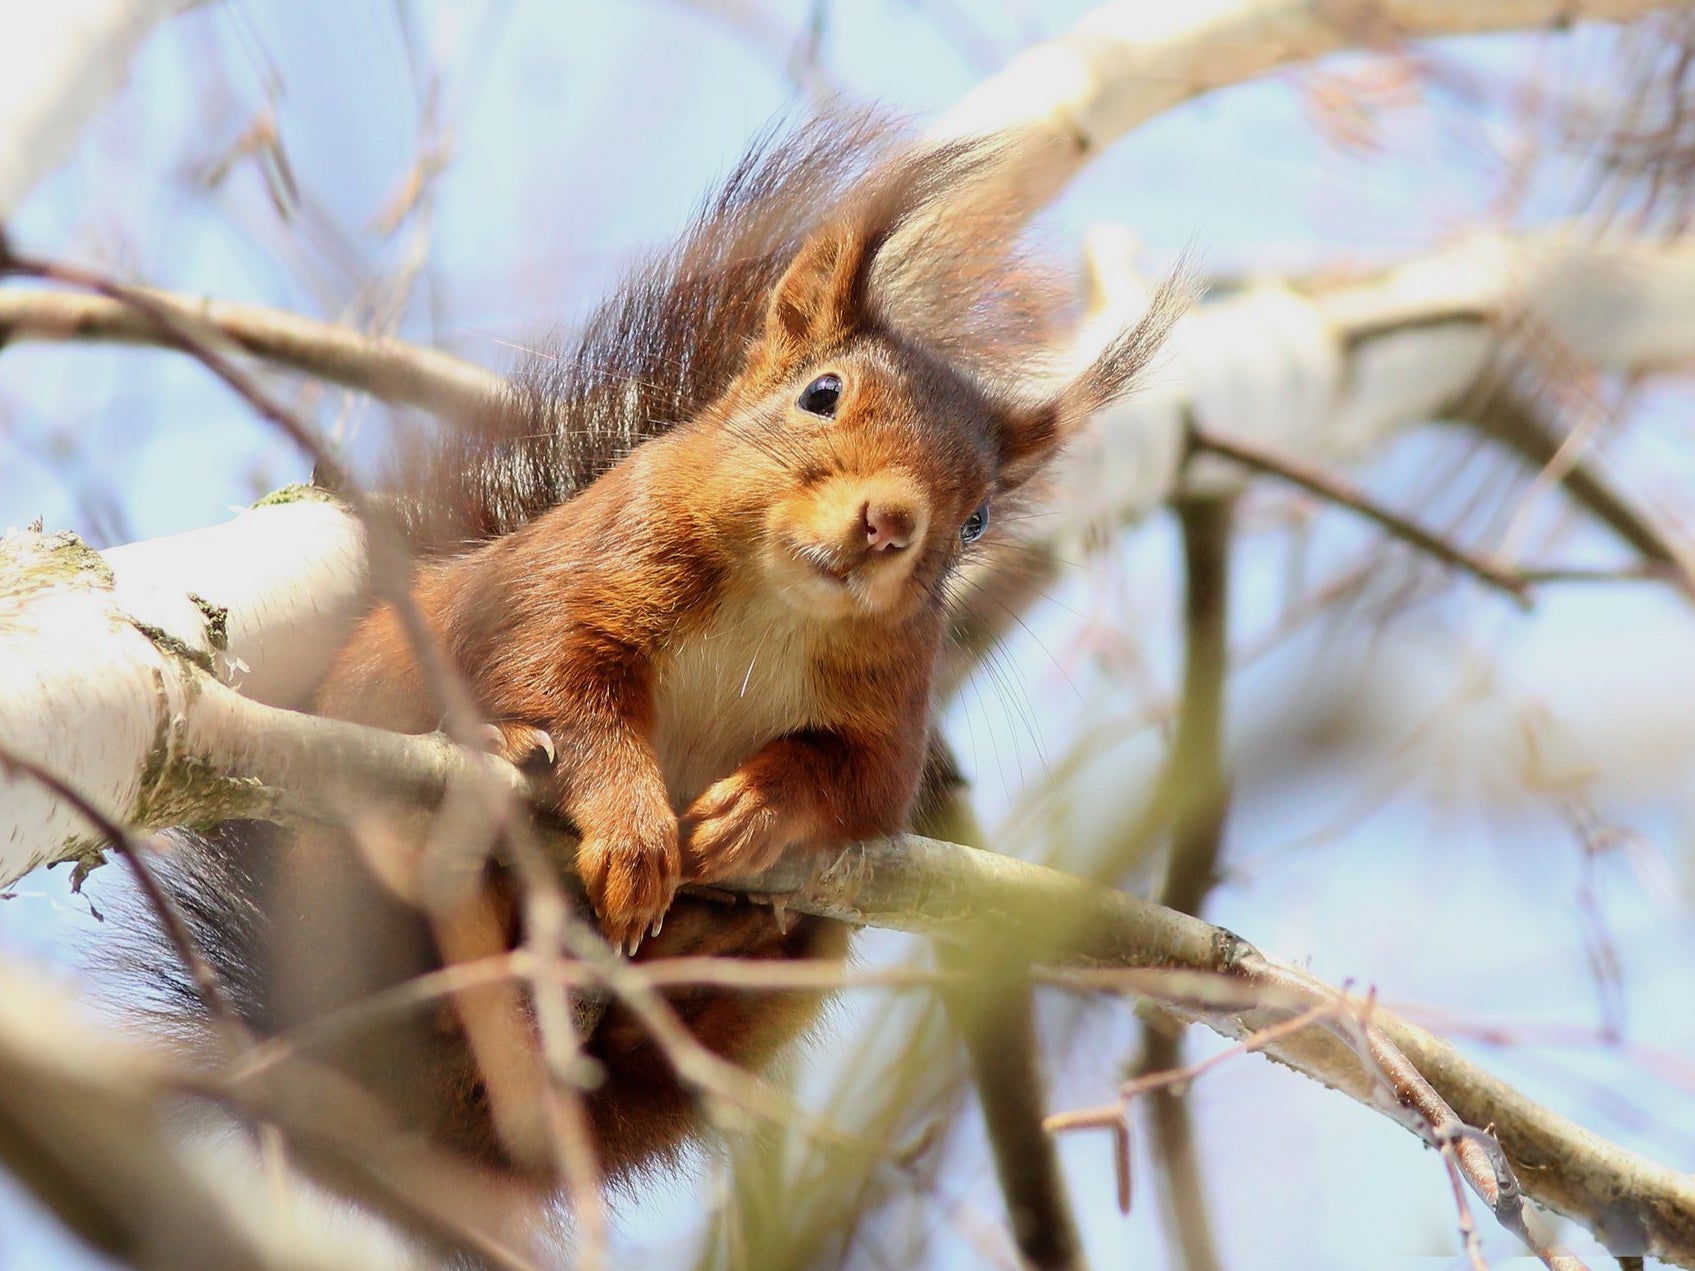 Red squirrels are at risk of dying out, say experts